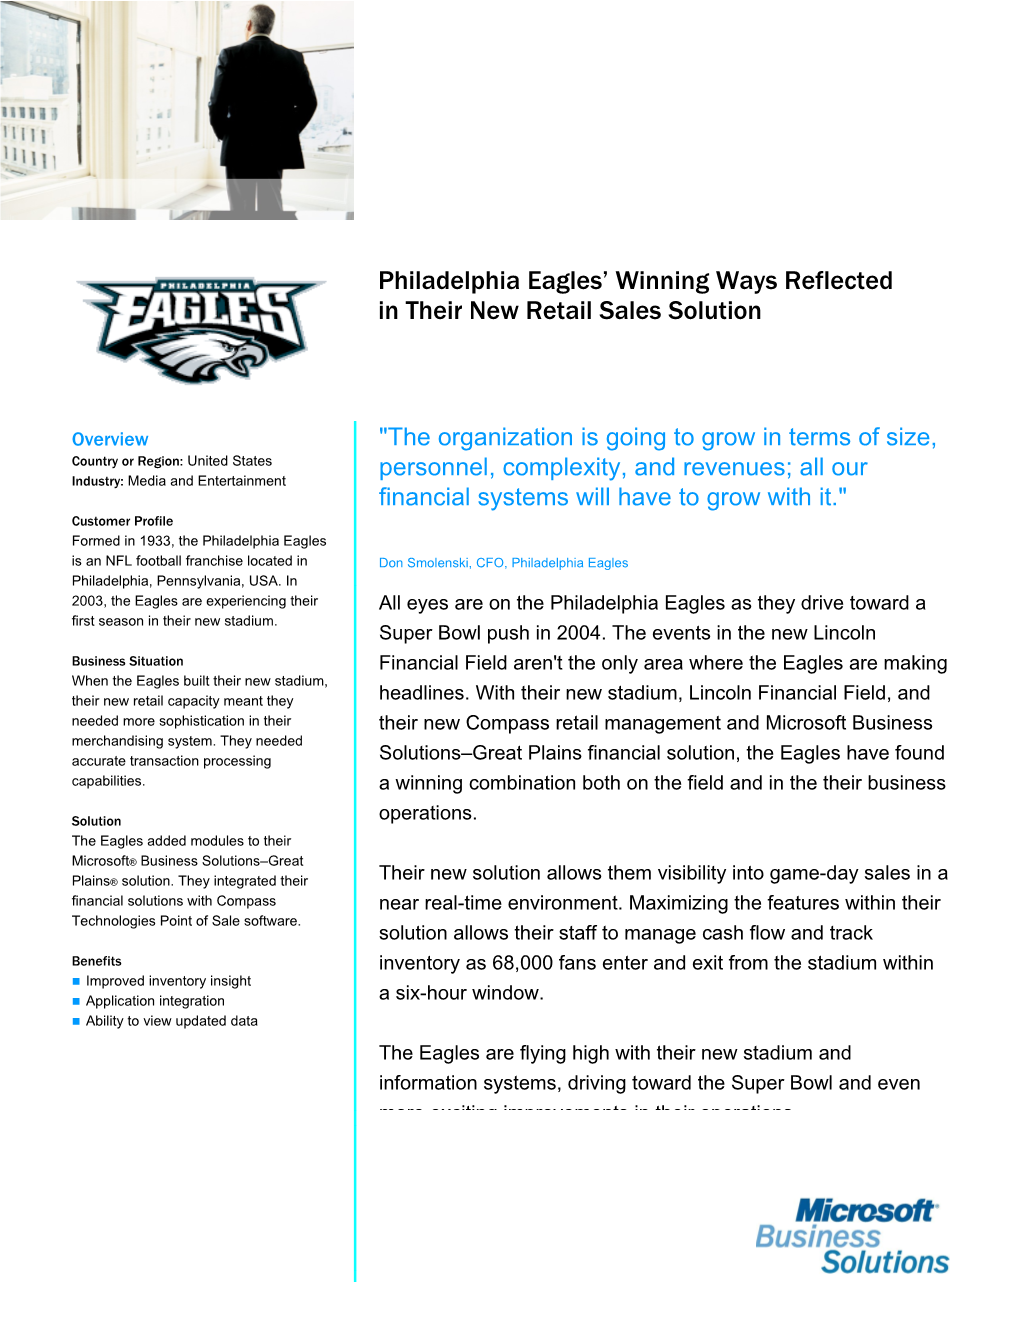 Philadelphia Eagles Winning Ways Reflected in Their New Retail Sales Solution